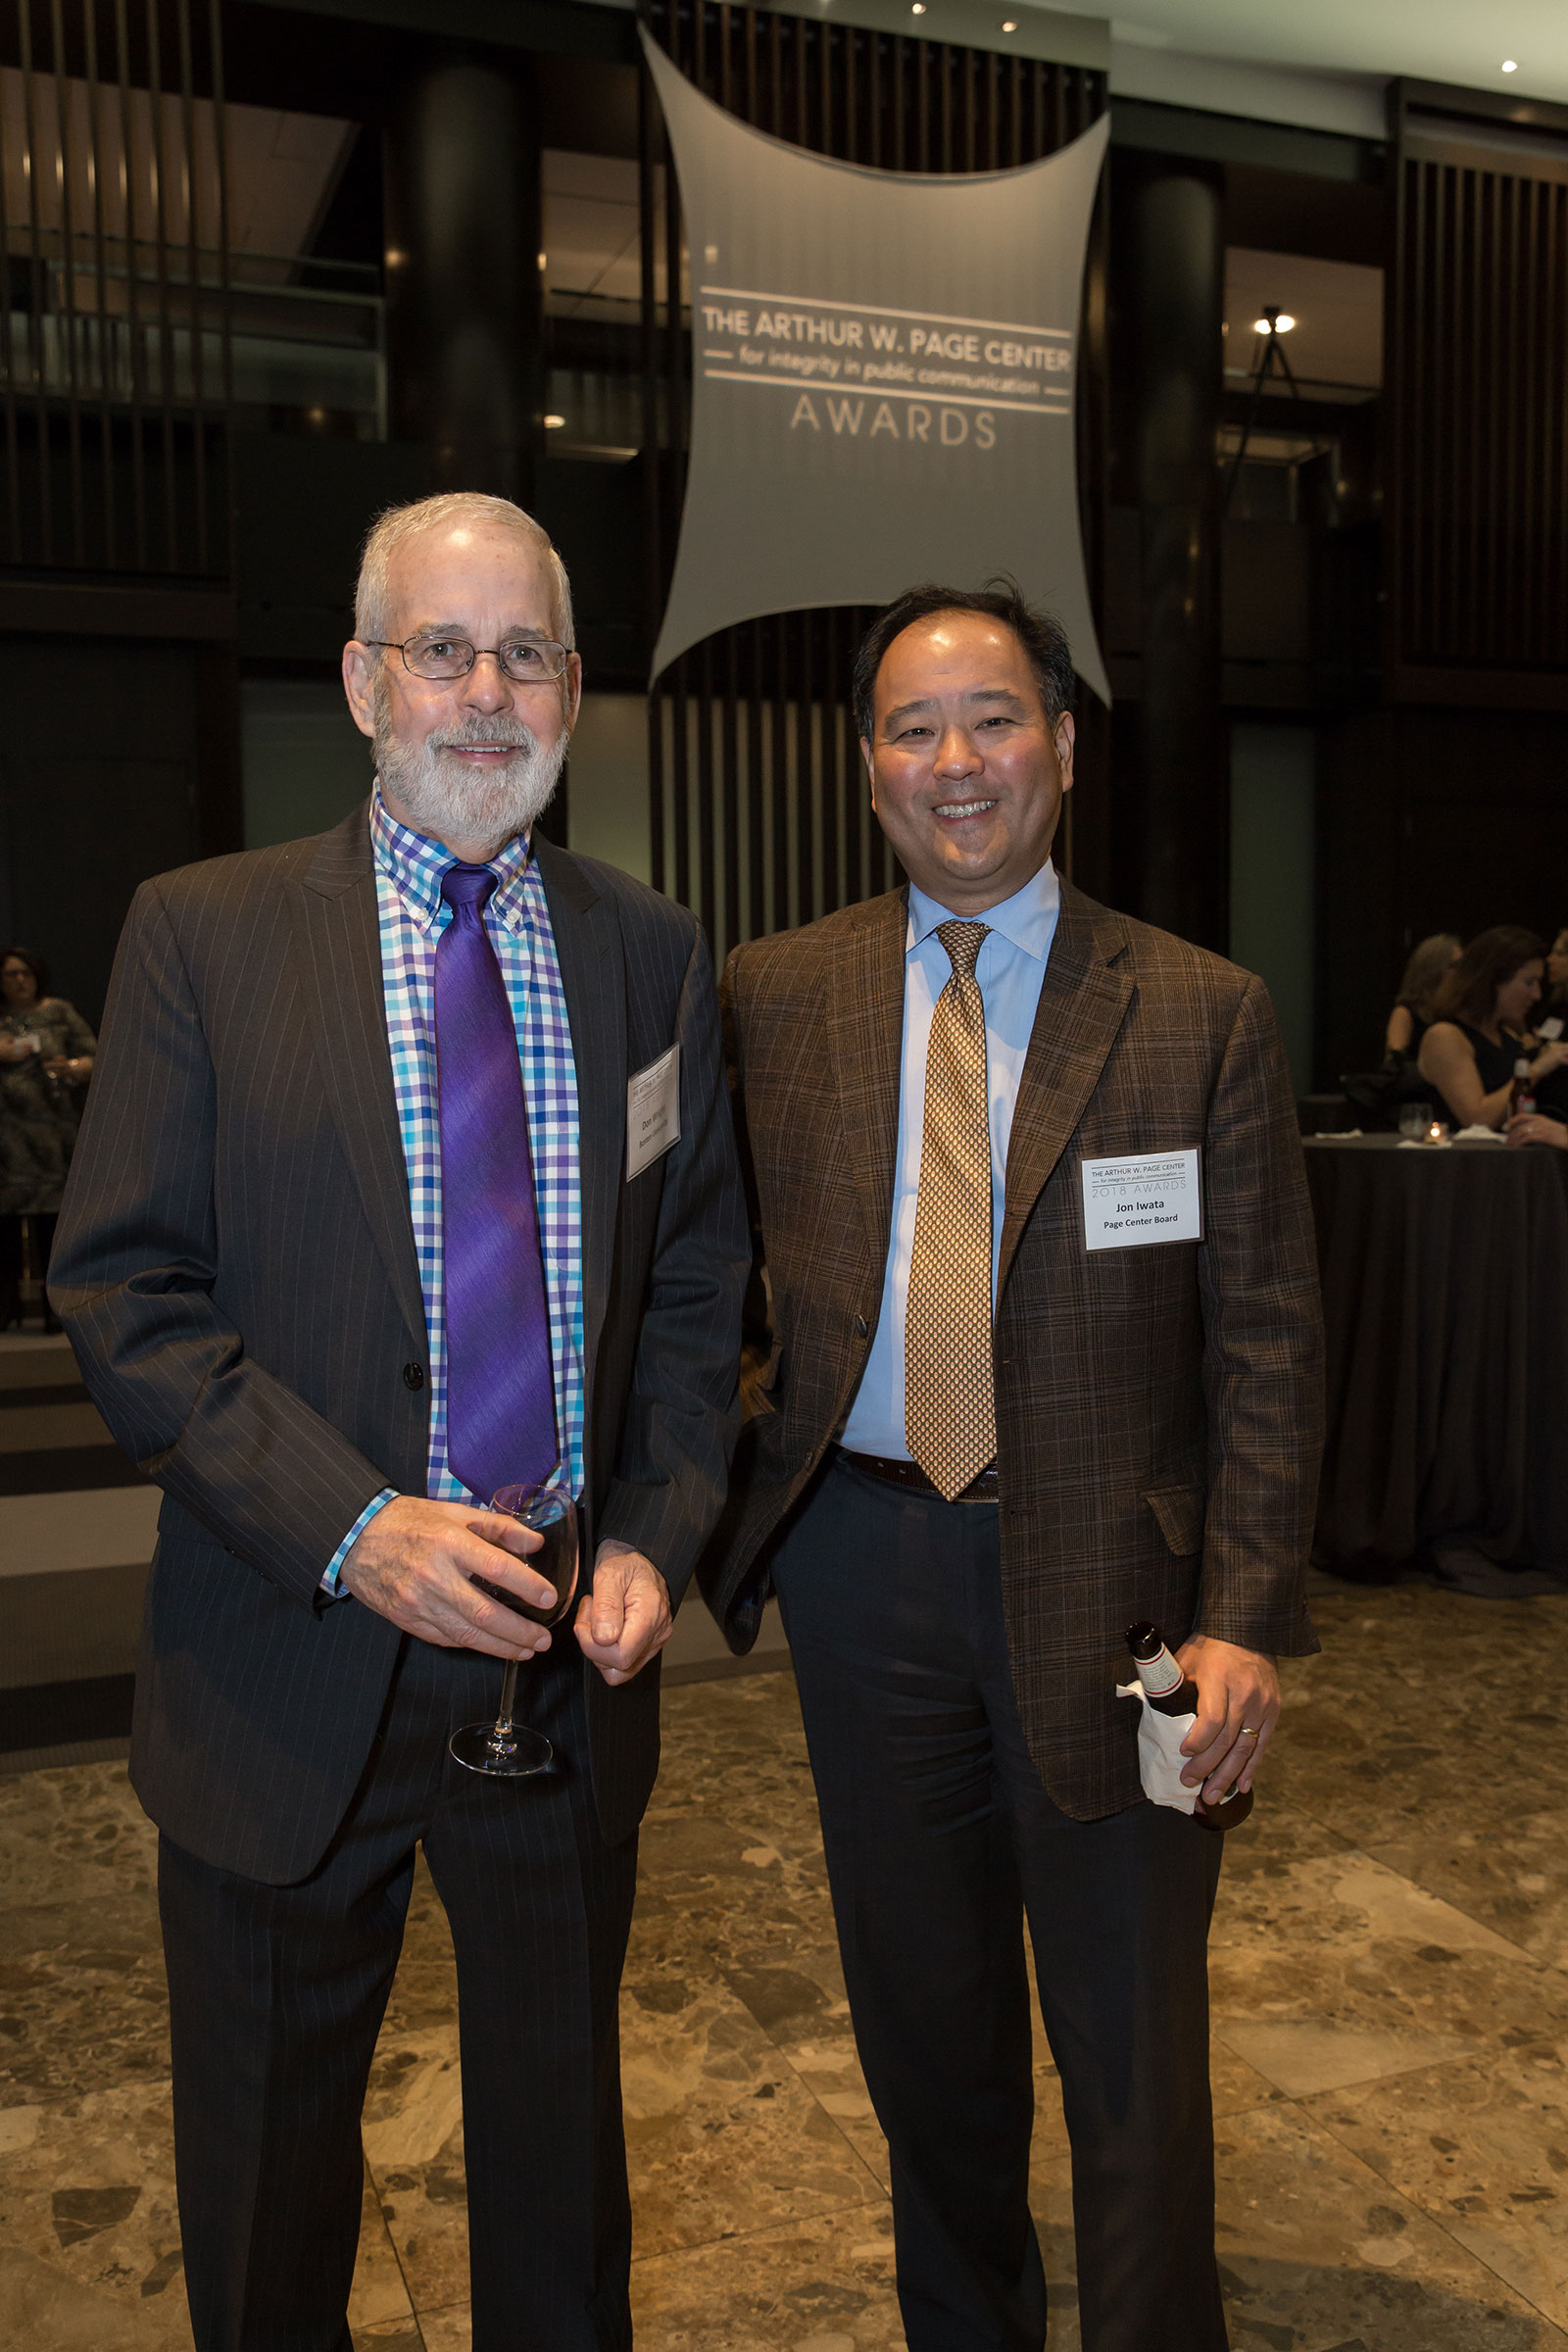 Don Wright (left) and Jon Iwata stop for a picture at the Arthur W. Page Center Awards. 